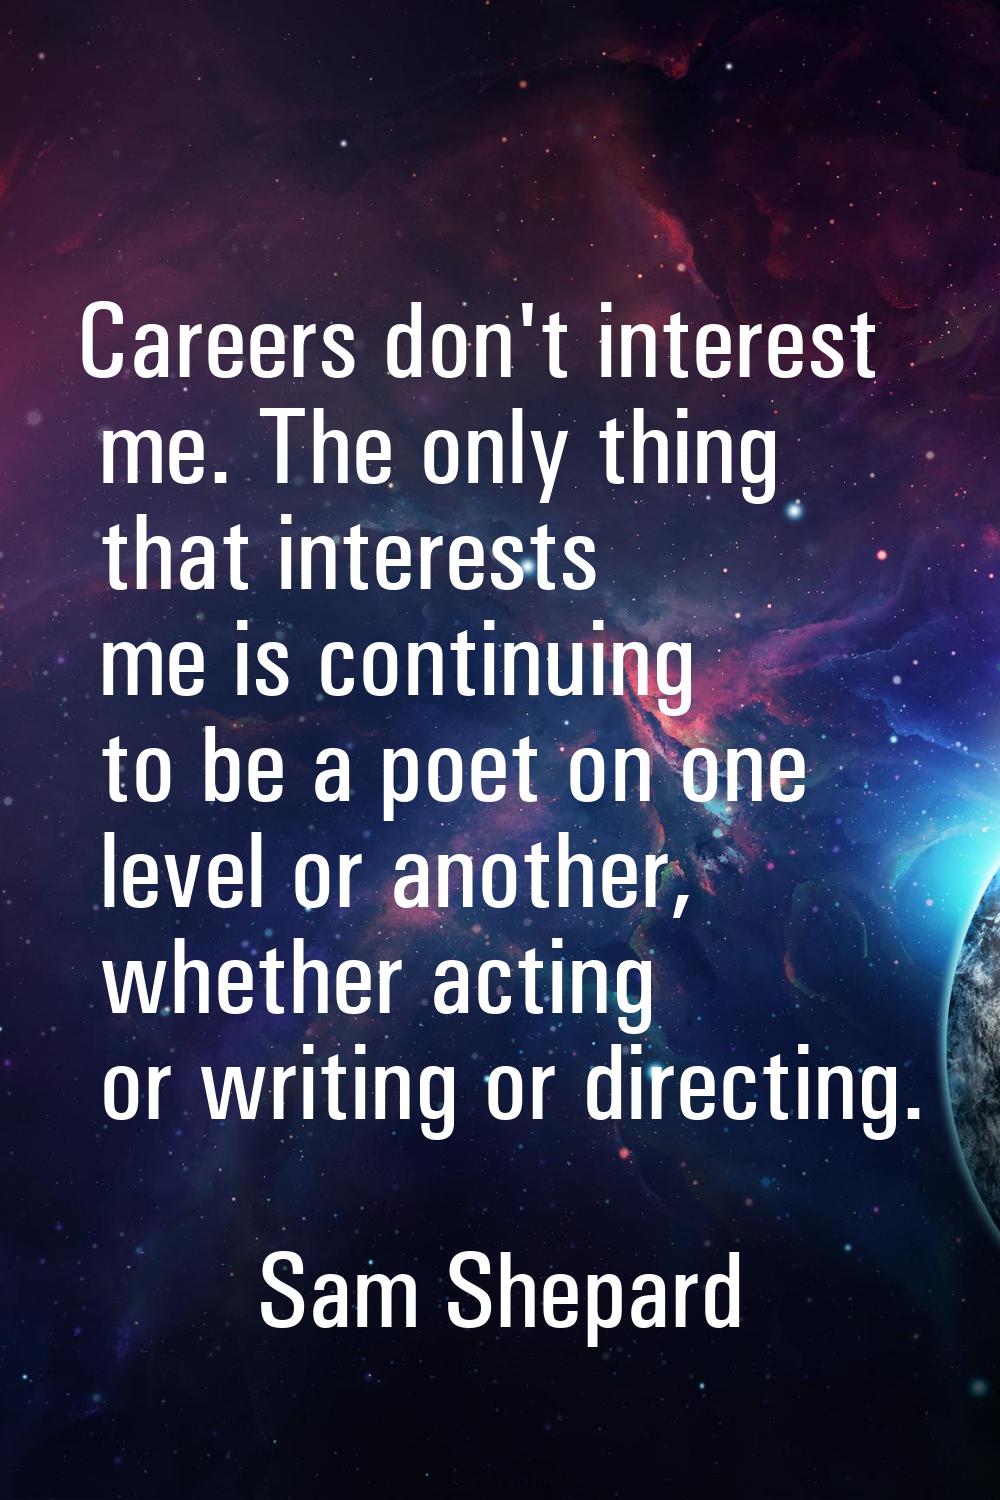 Careers don't interest me. The only thing that interests me is continuing to be a poet on one level